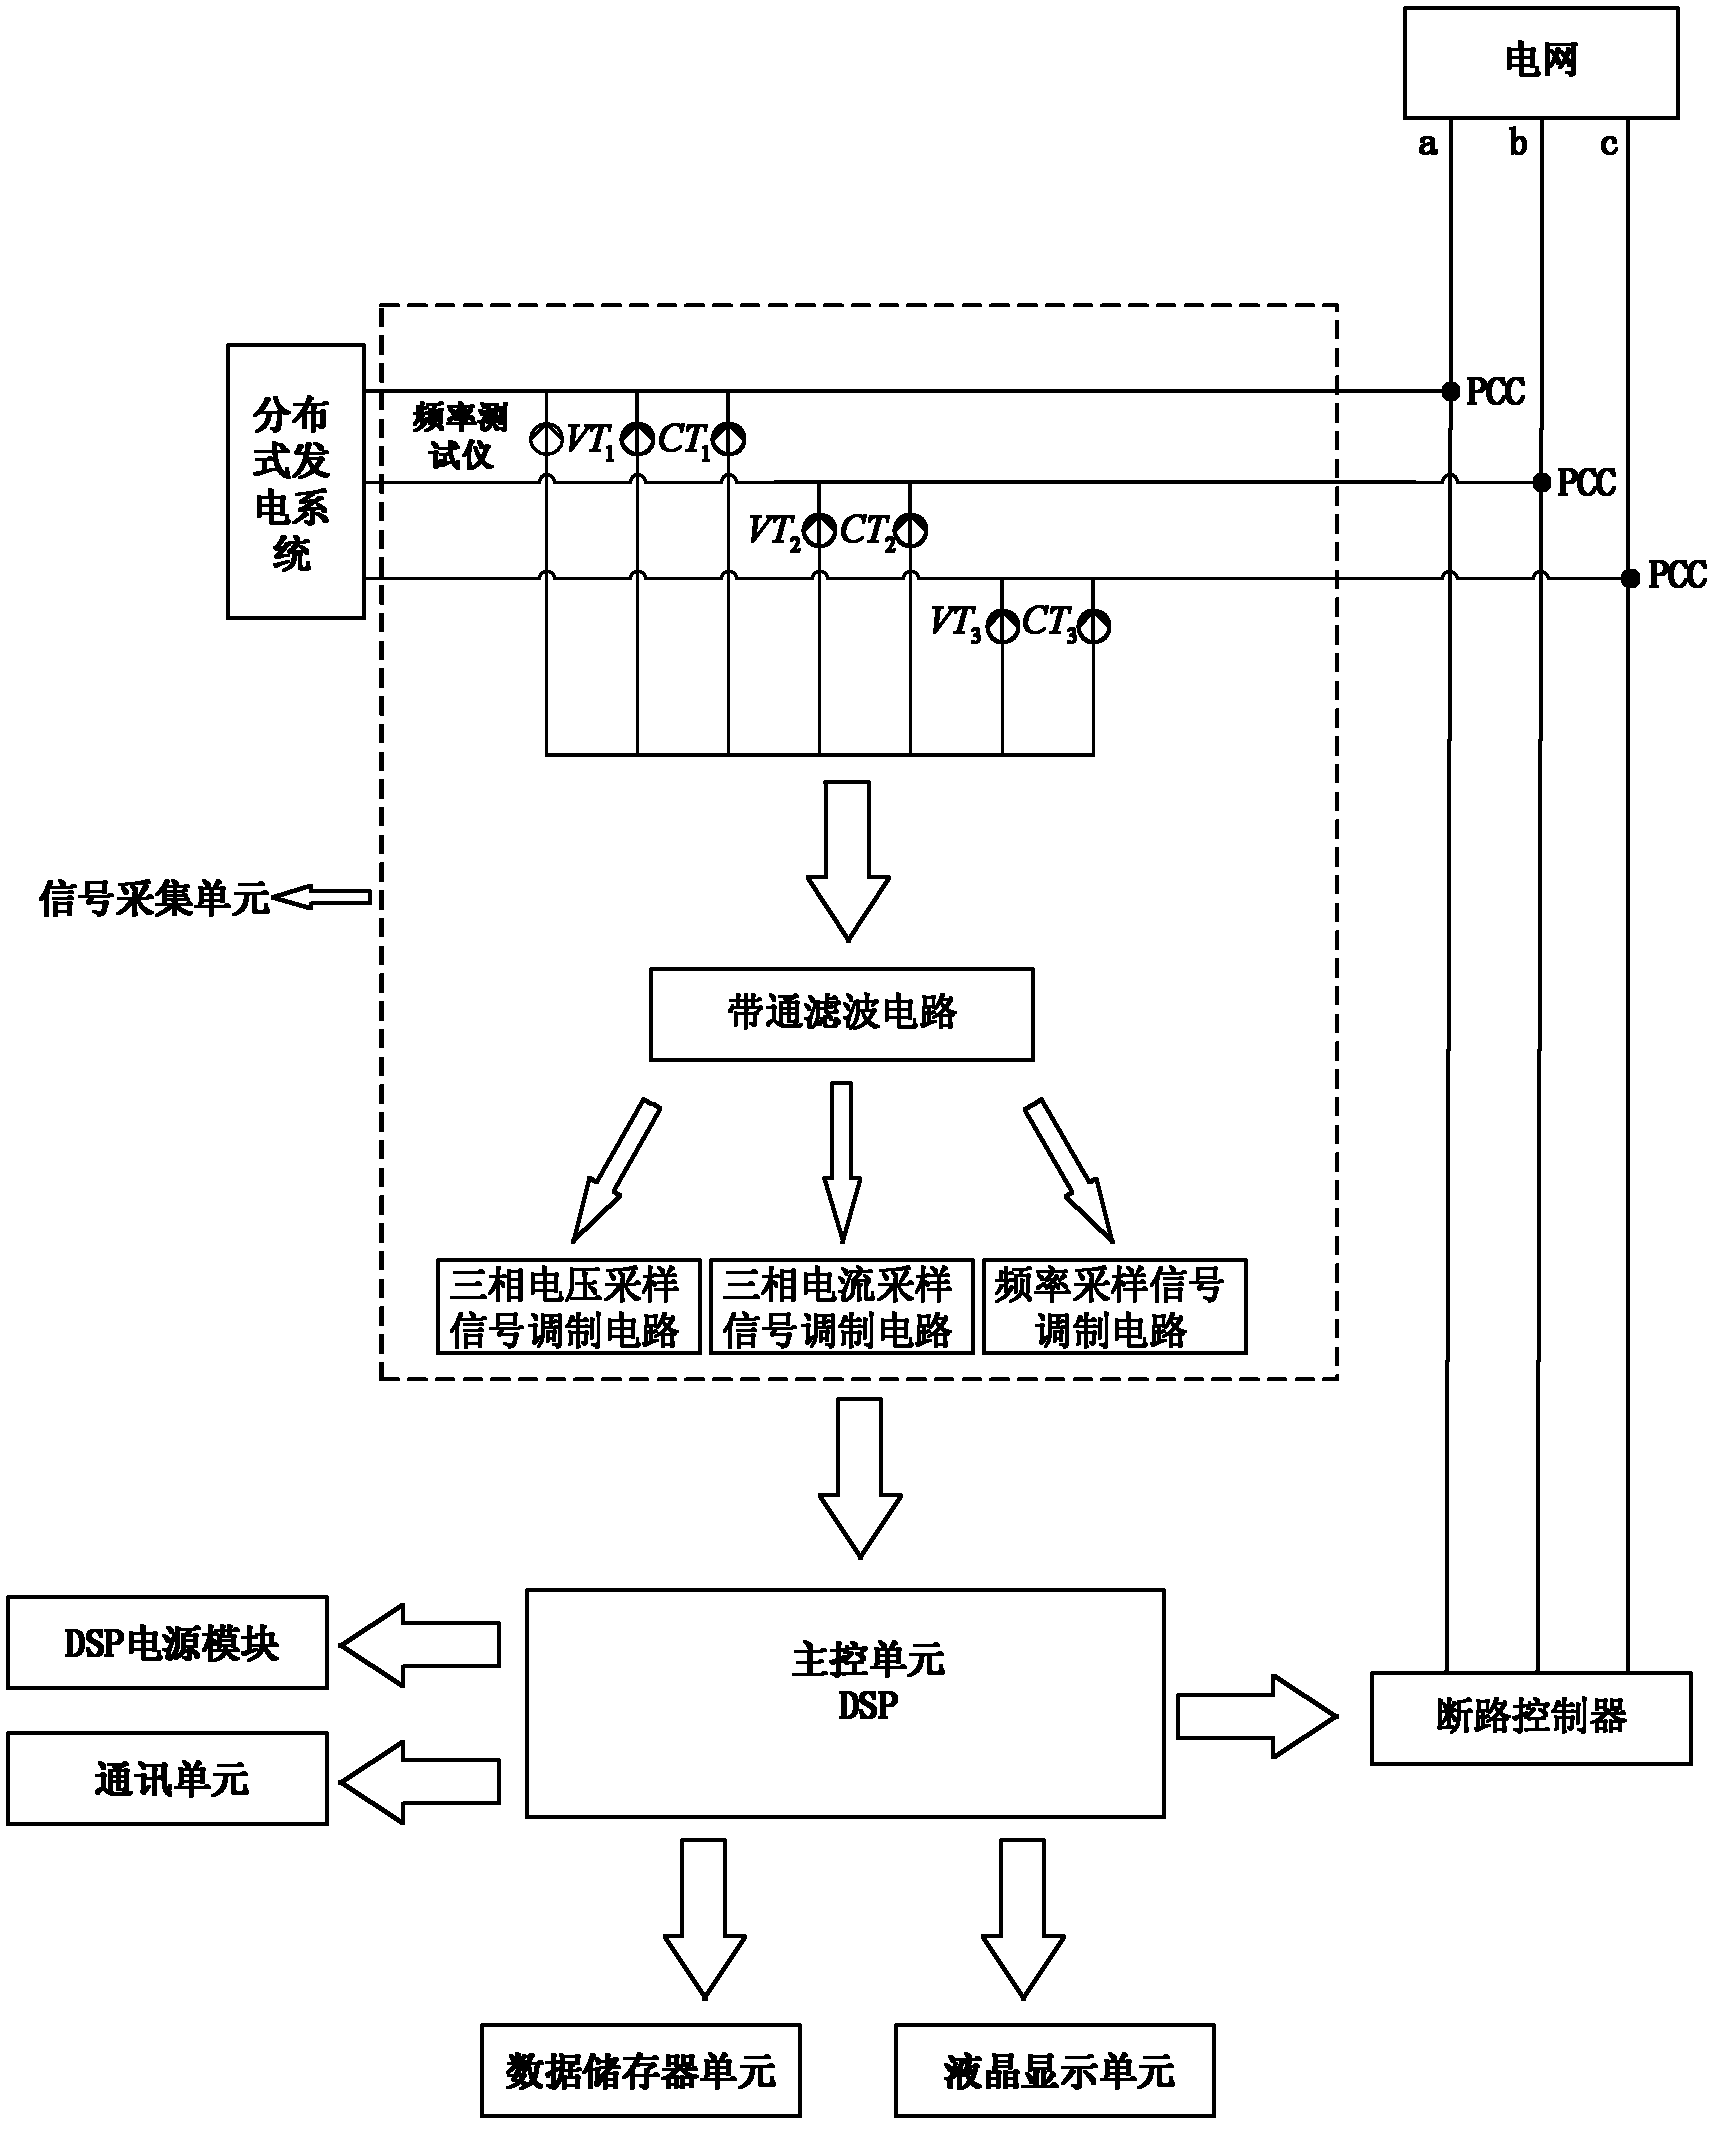 Multiprocess island effect detection device and method